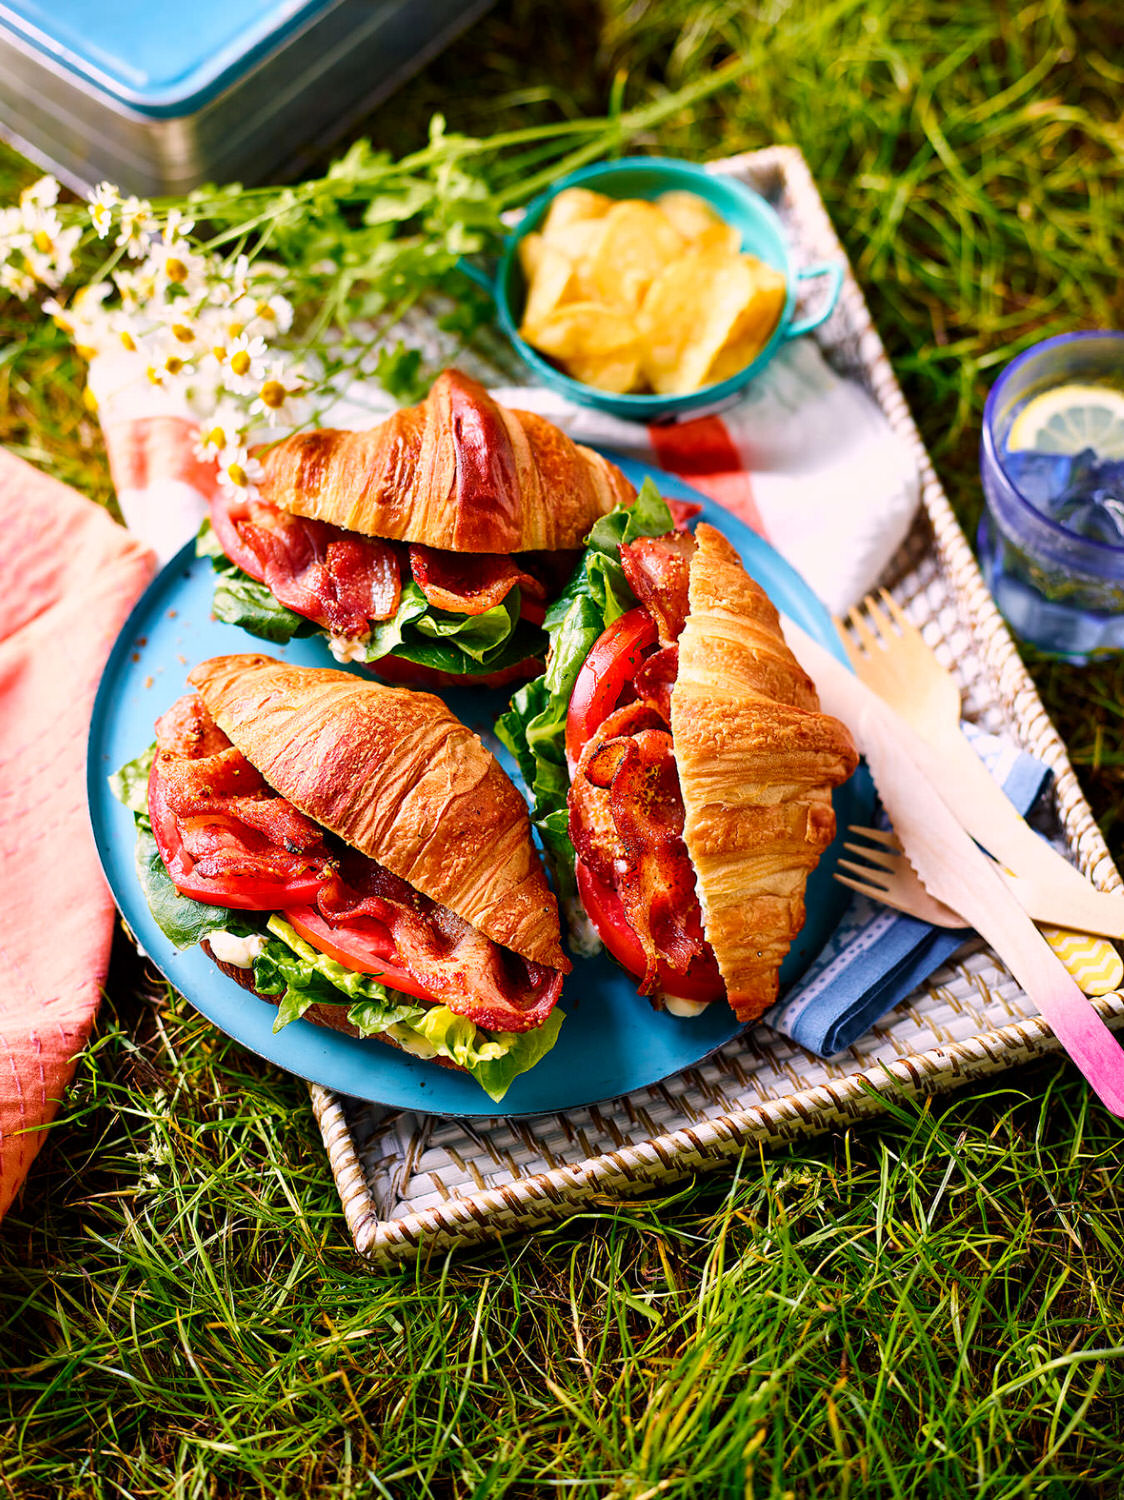 Croissants with bacon lettuce and tomato with mayo on a tray in an outdoor picnic setting